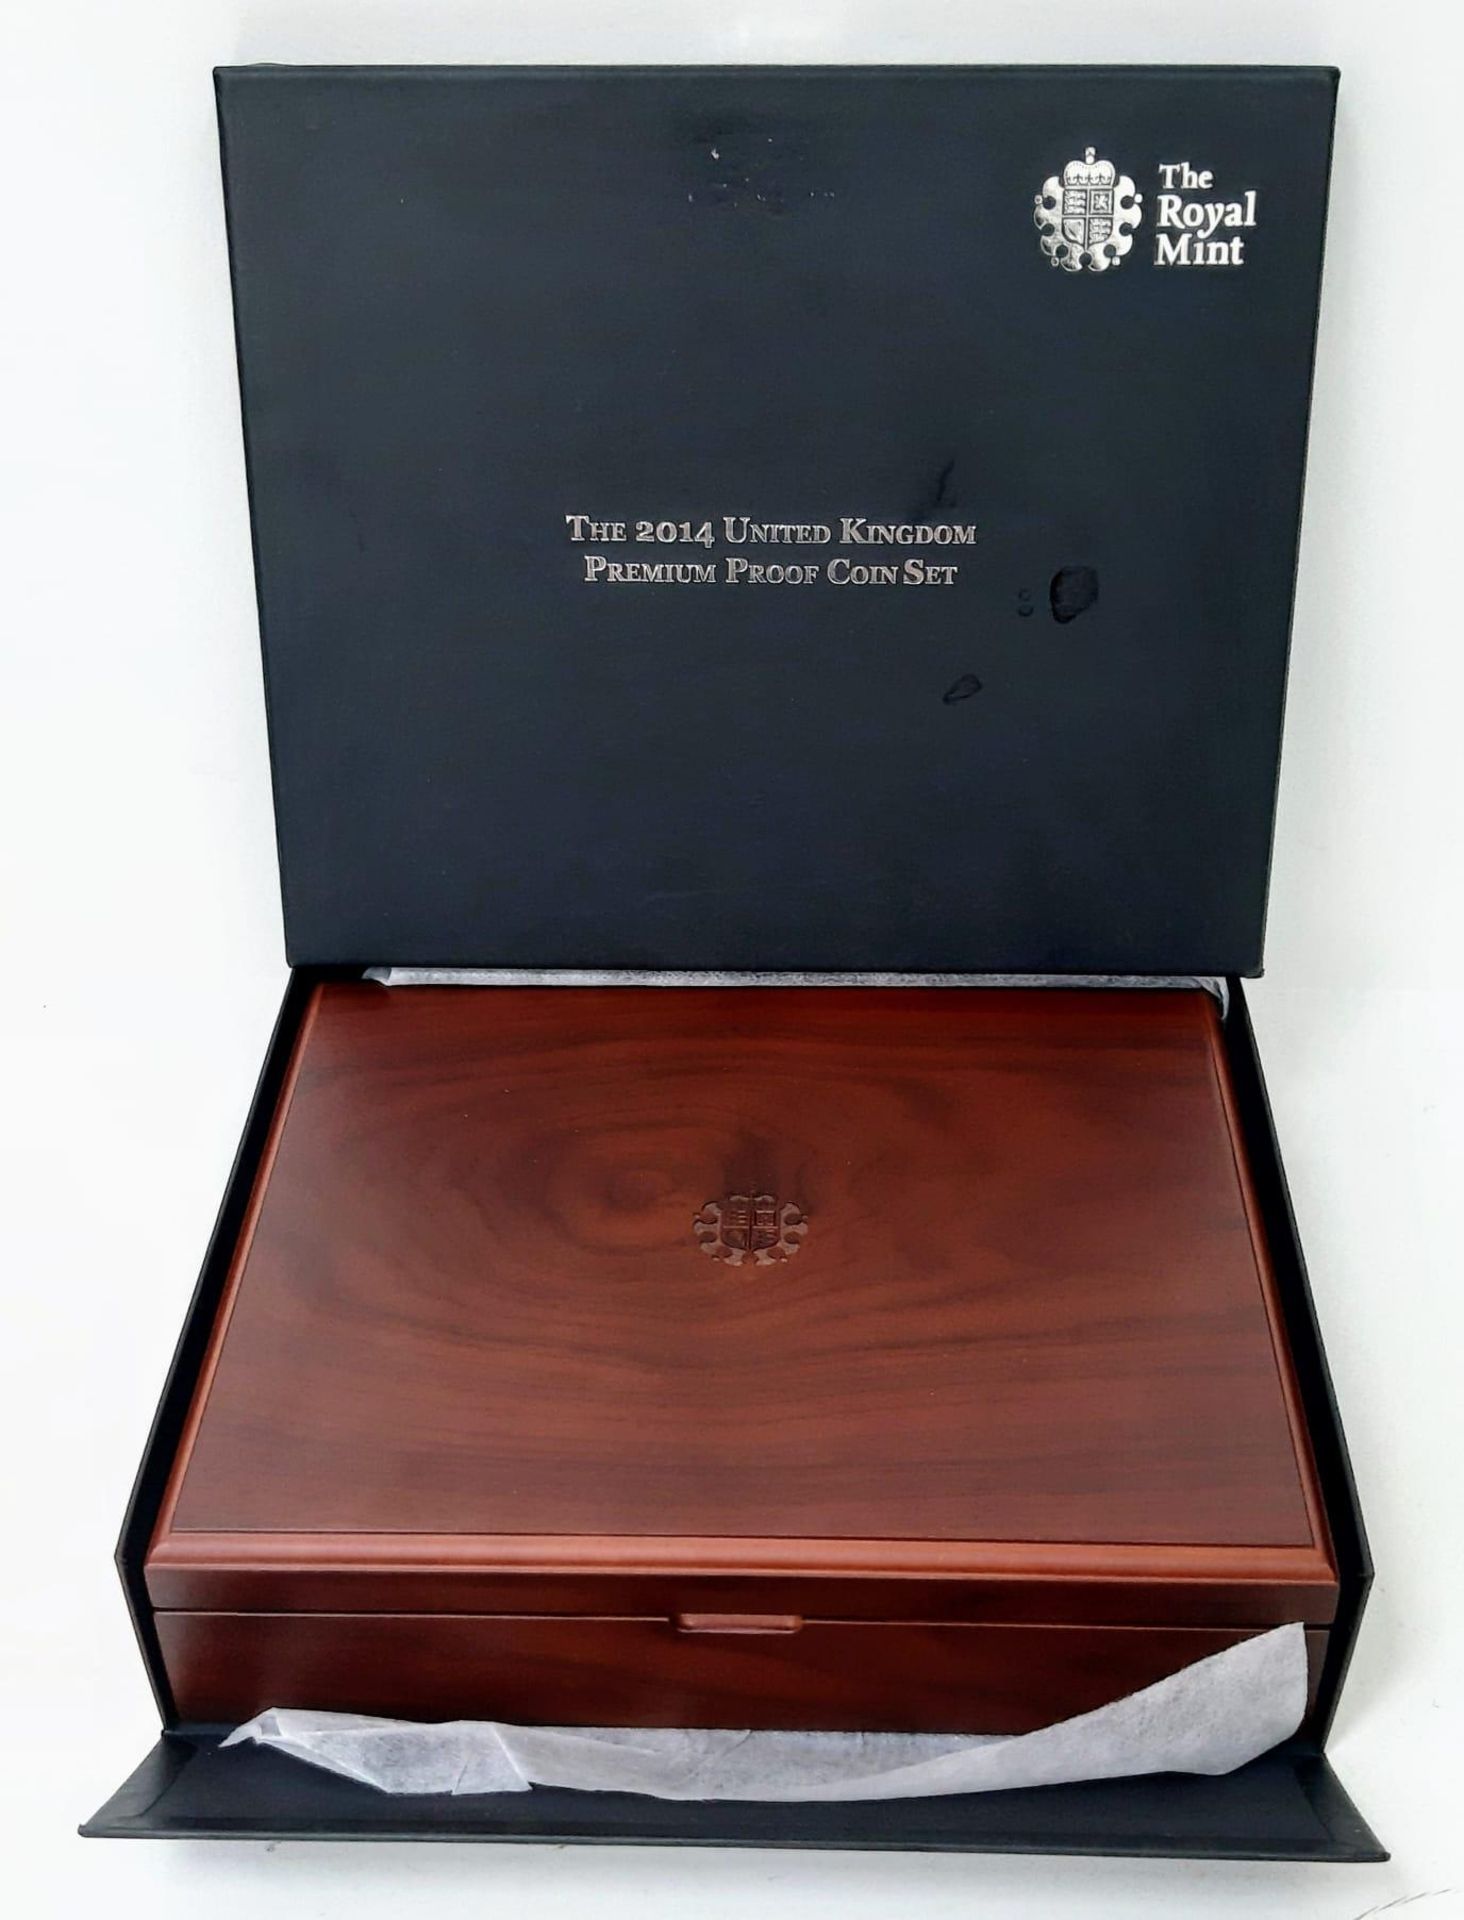 The Royal Mint 2014 United Kingdom Premium Proof 15 Coin Set. Slight marks on exterior box but the - Image 5 of 8